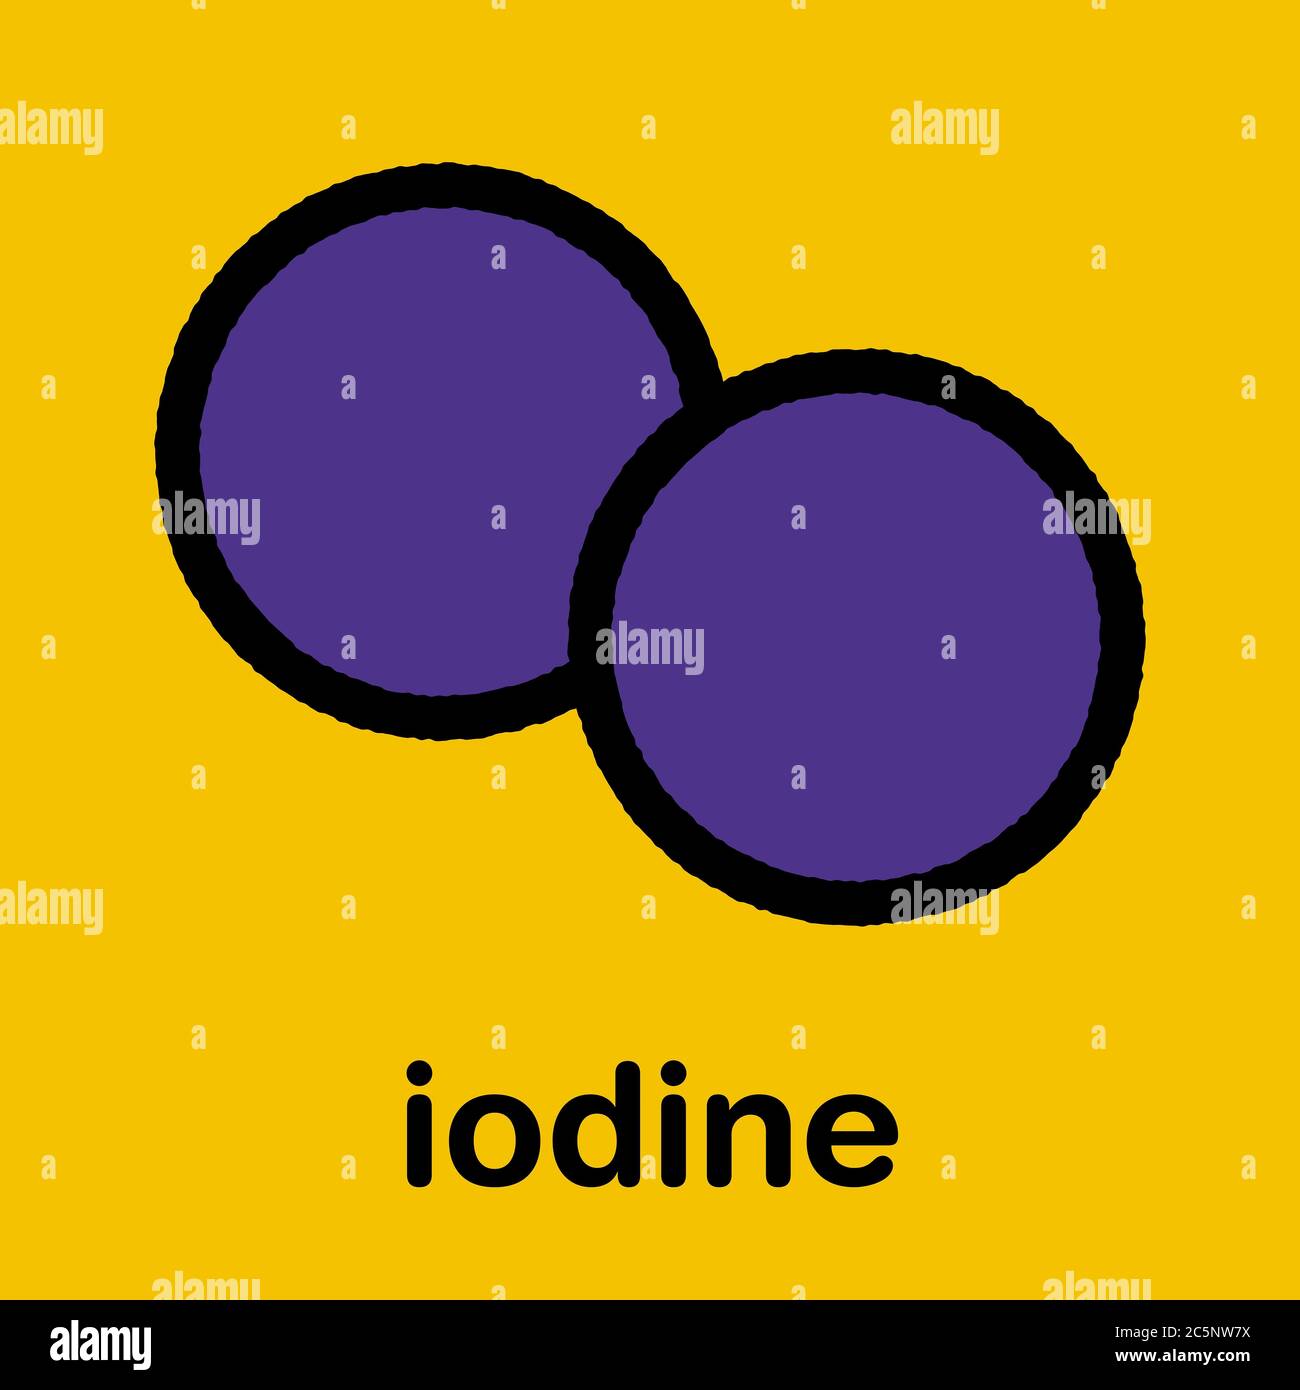 Iodine (I2) molecule. Solutions of elemental iodine are used as disinfectants. Stylized skeletal formula (chemical structure): Atoms are shown as color-coded circles: iodine (purple). Stock Photo